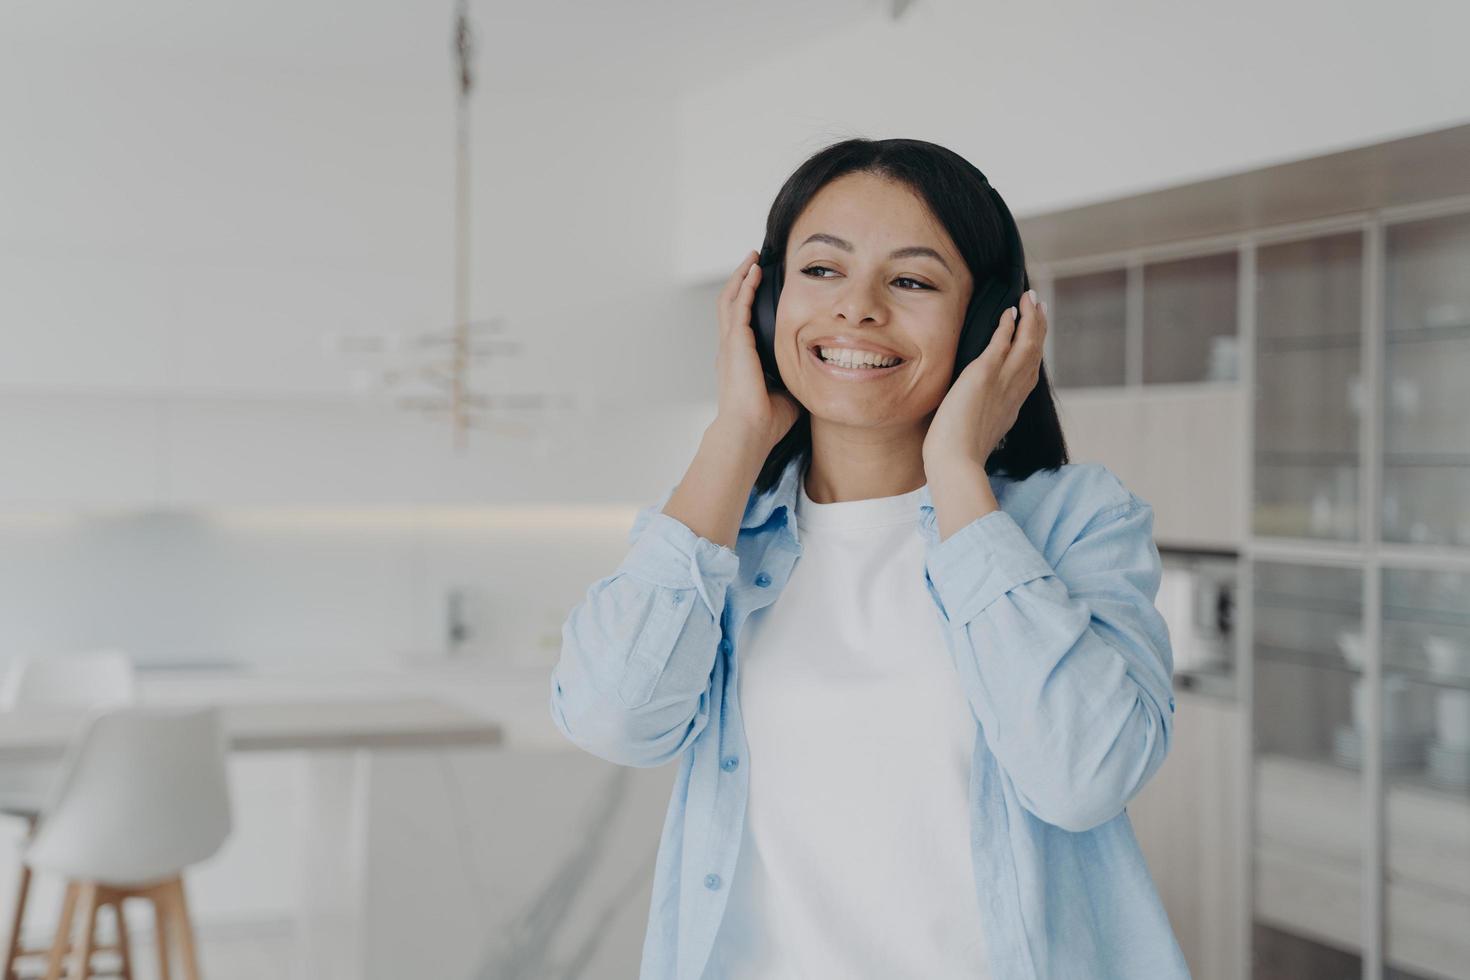 Smiling woman listening to music in wireless headphones, enjoying musical sound resting at home photo